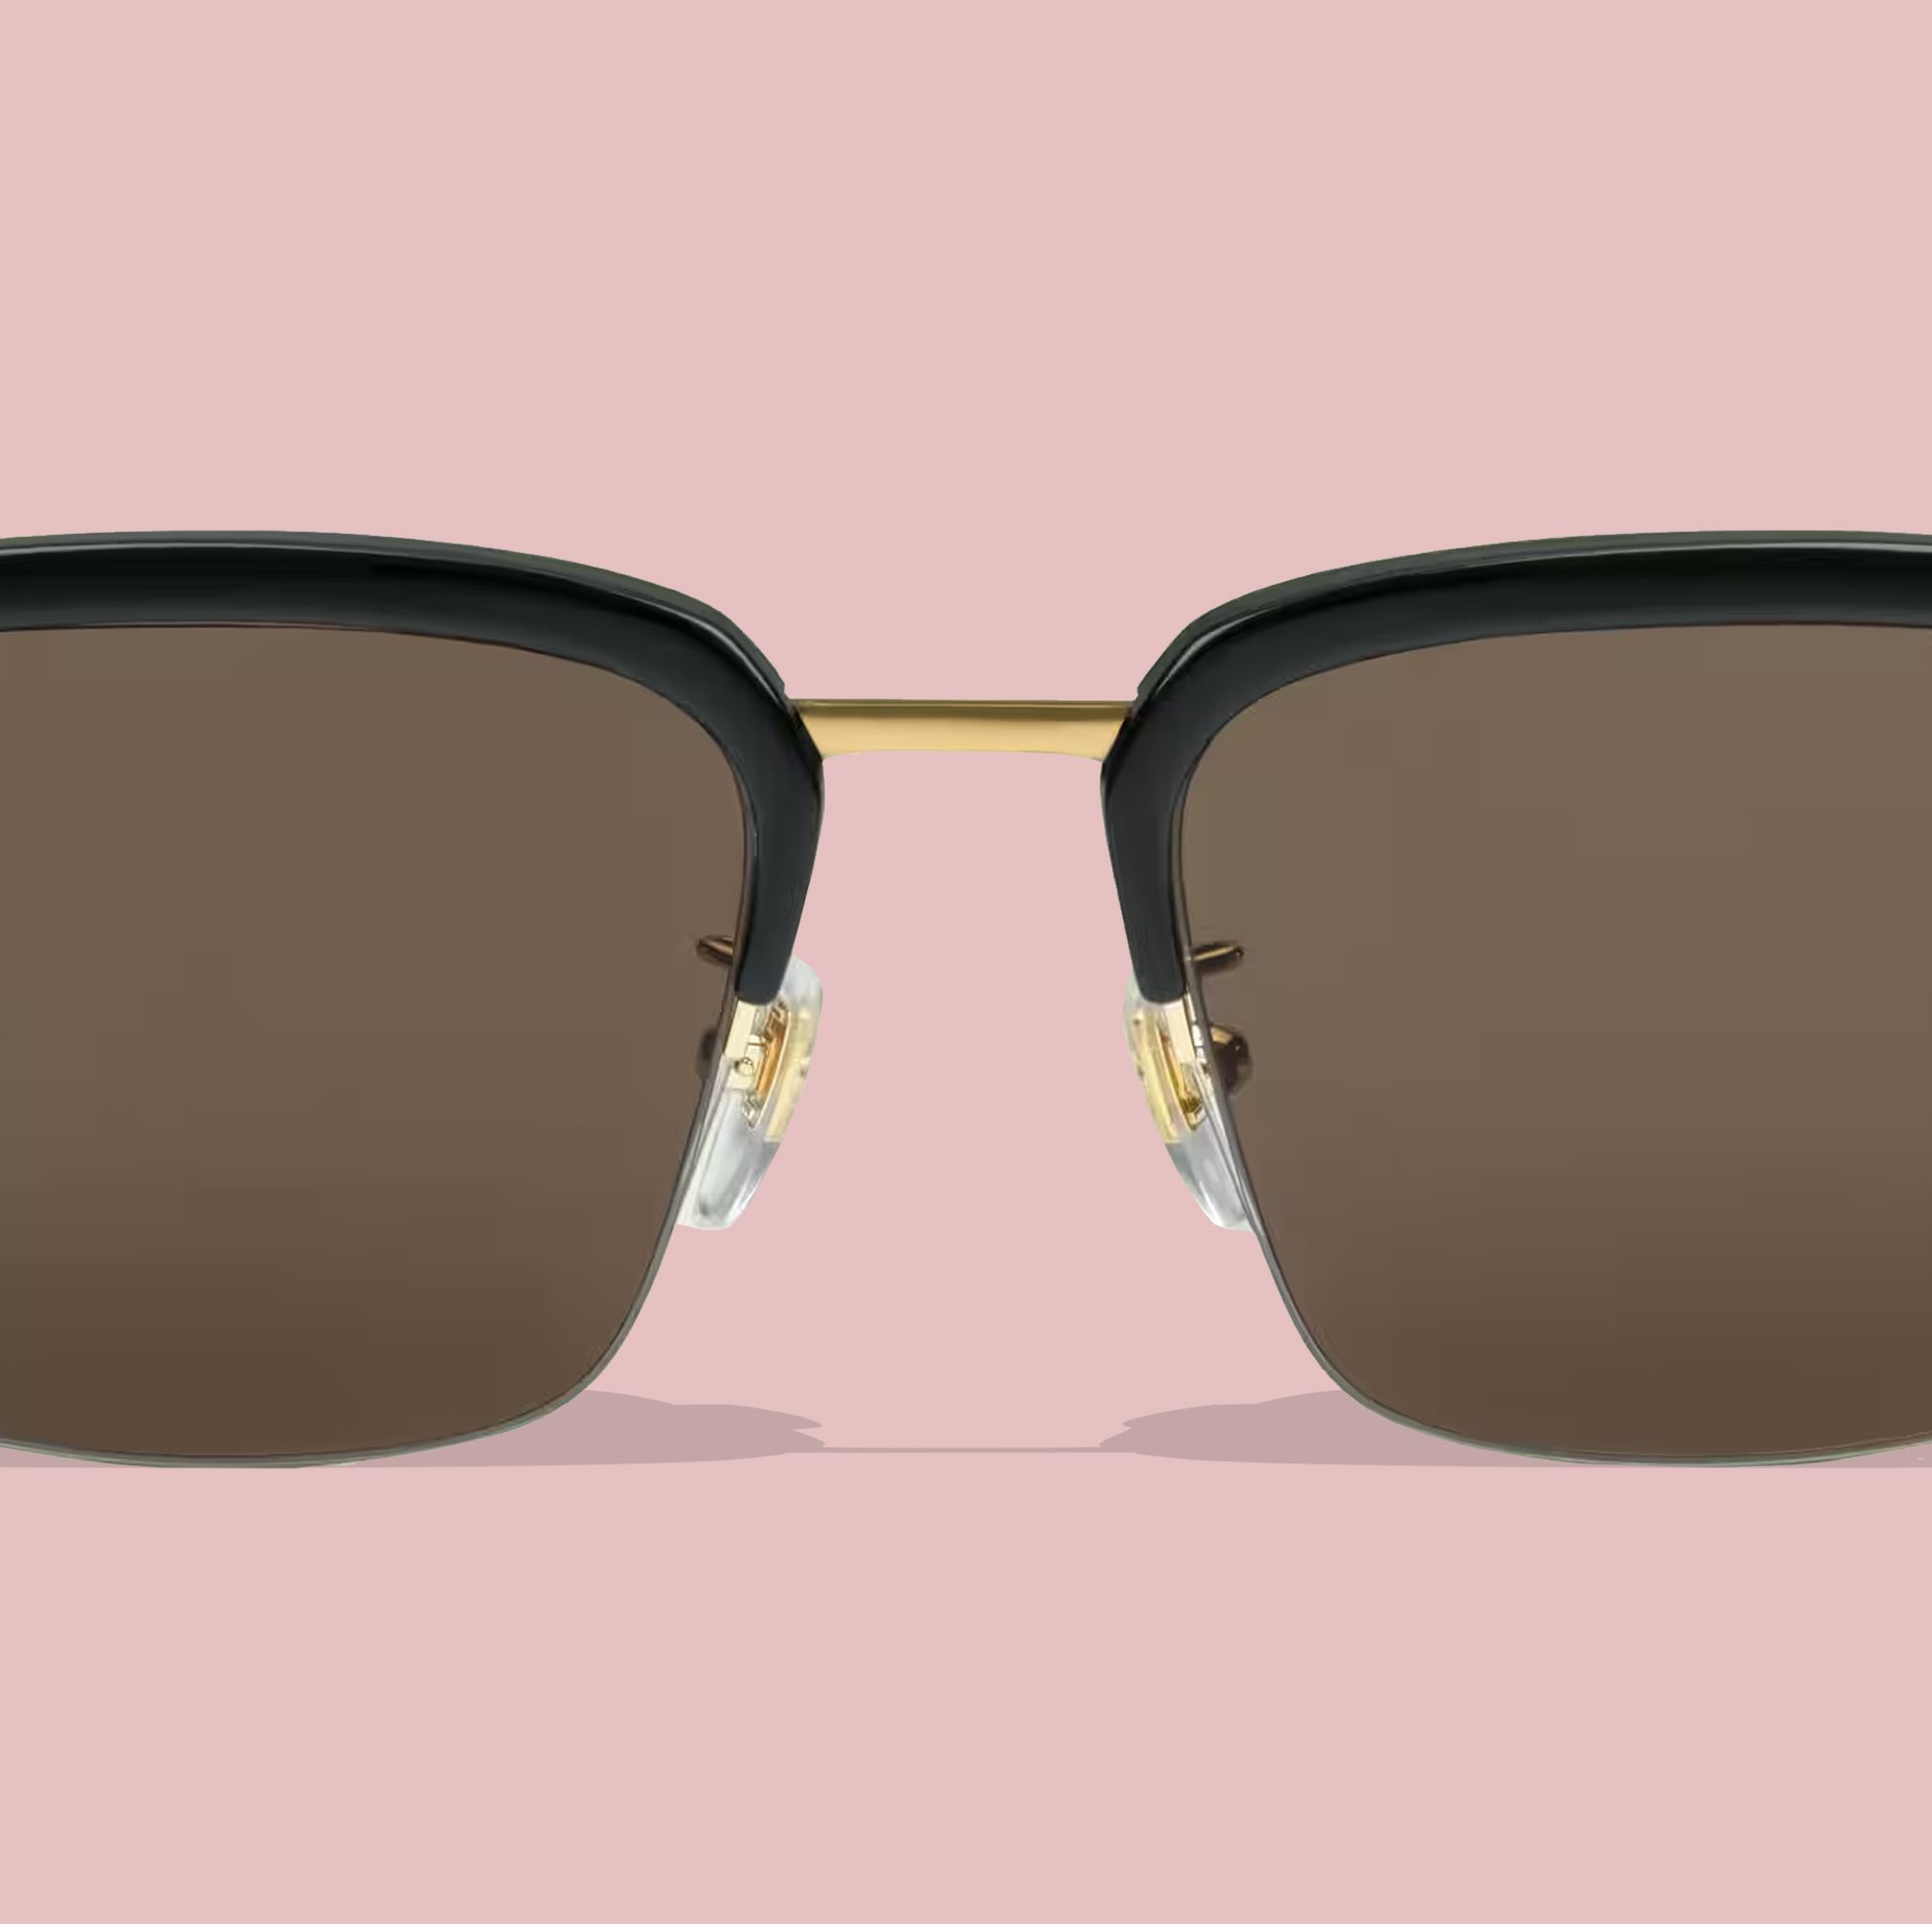 The 25 Best Sunglasses Brands to Wear Every Damn Day